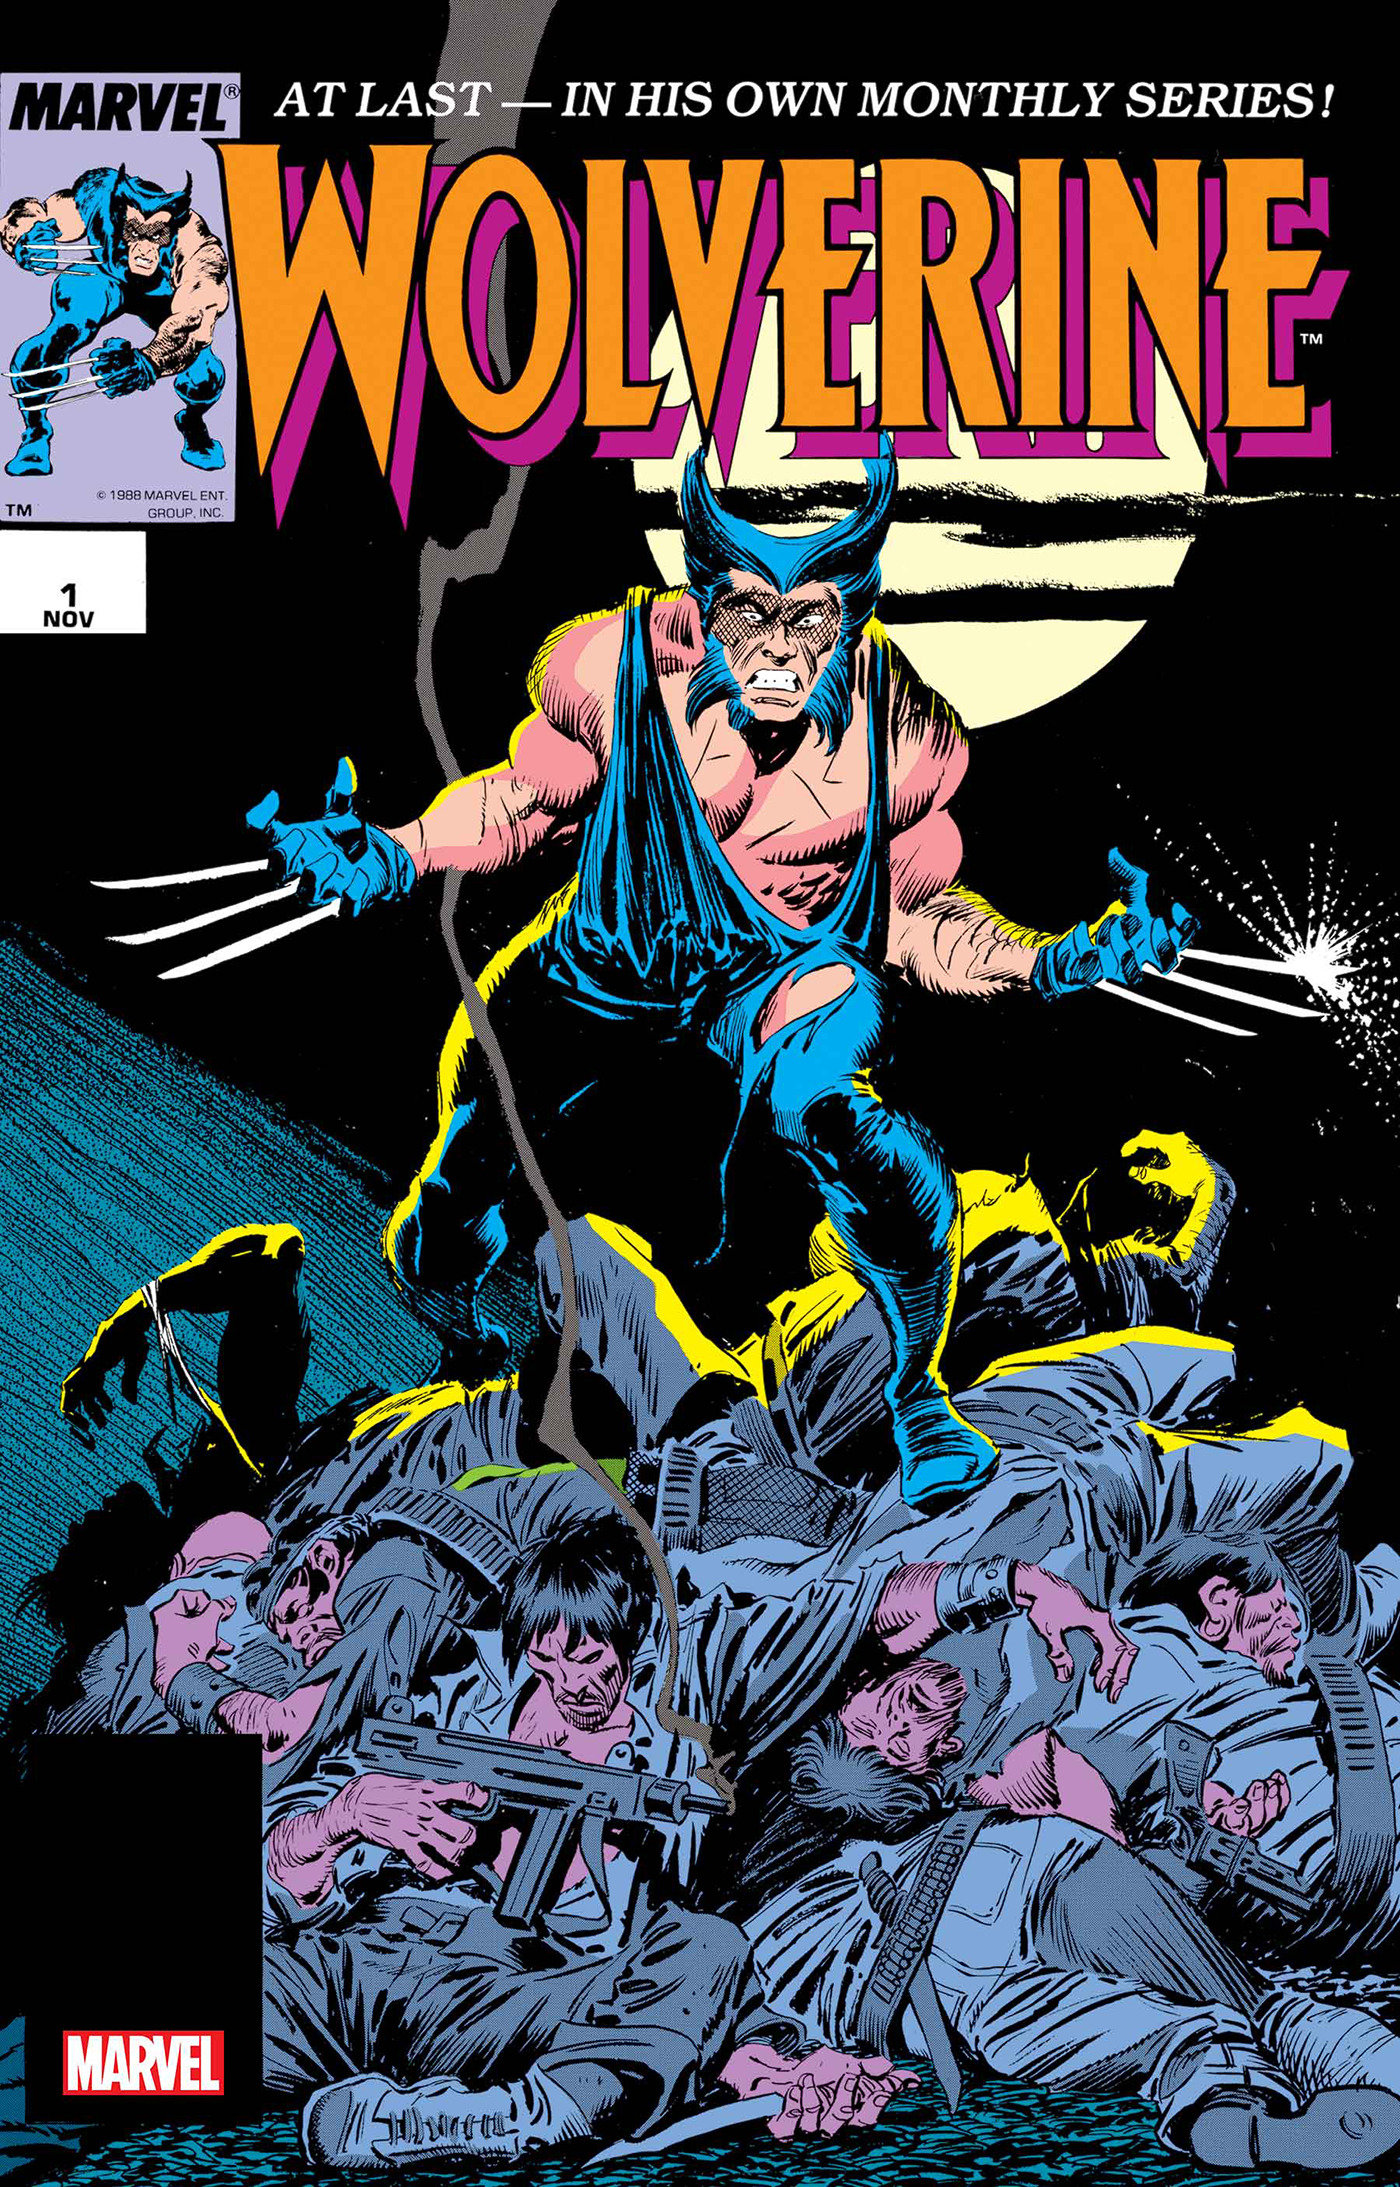 Wolverine By Claremont & Buscema #1 Facsimile Edition Foil Variant [New Printing]